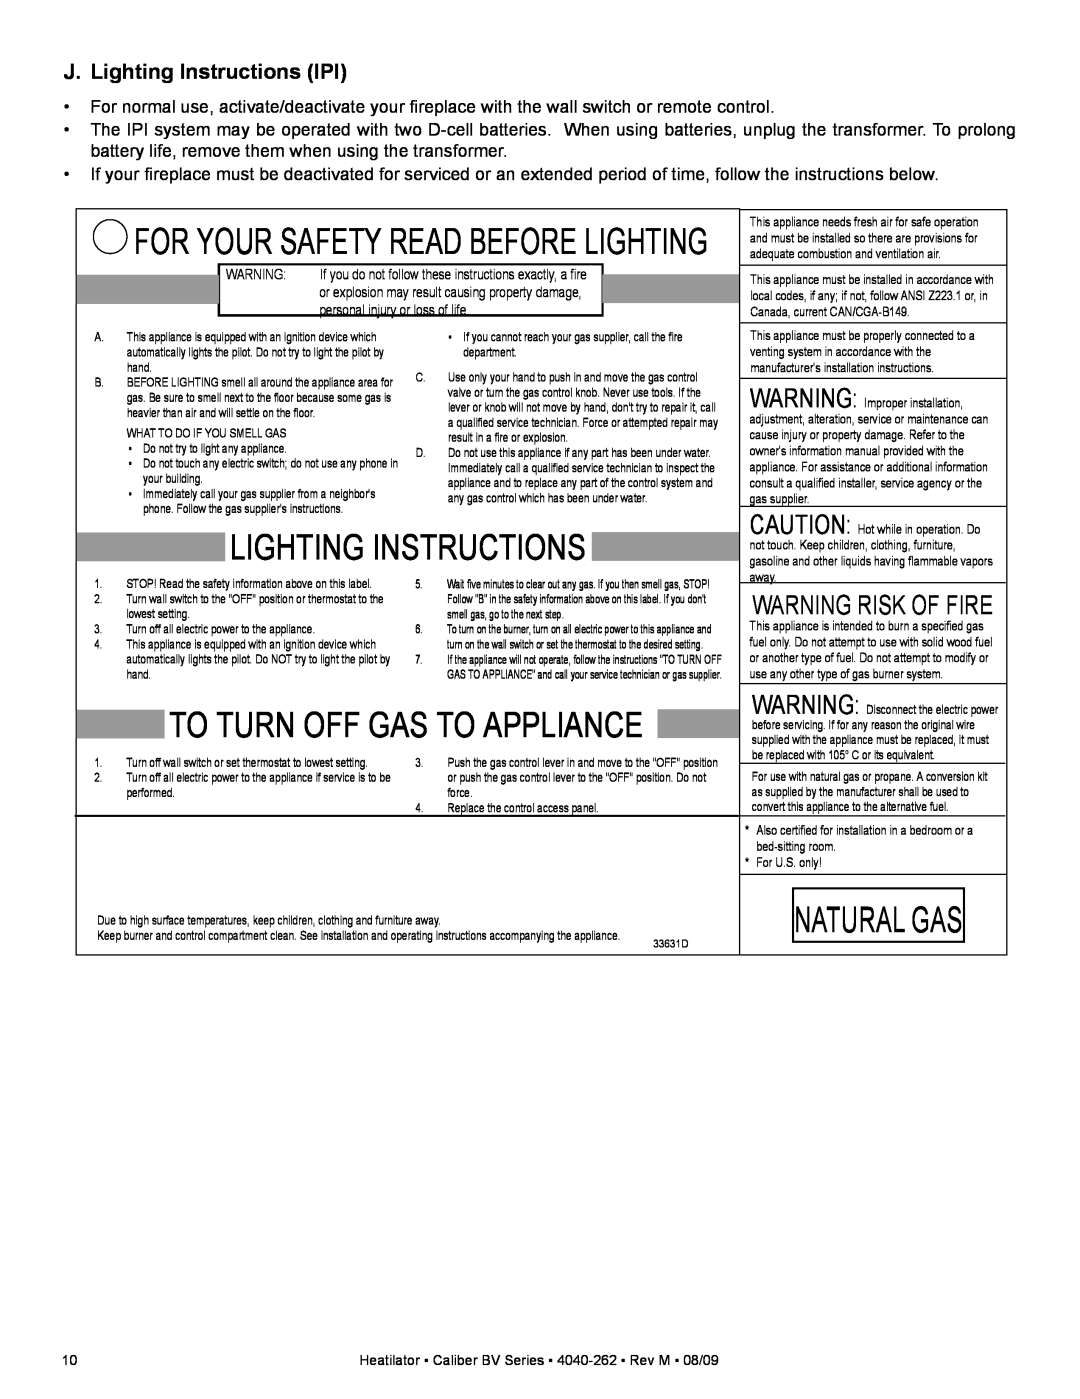 Heatiator CB4236IR Warning Risk Of Fire, J. Lighting Instructions IPI, For Your Safety Read Before Lighting, Natural Gas 